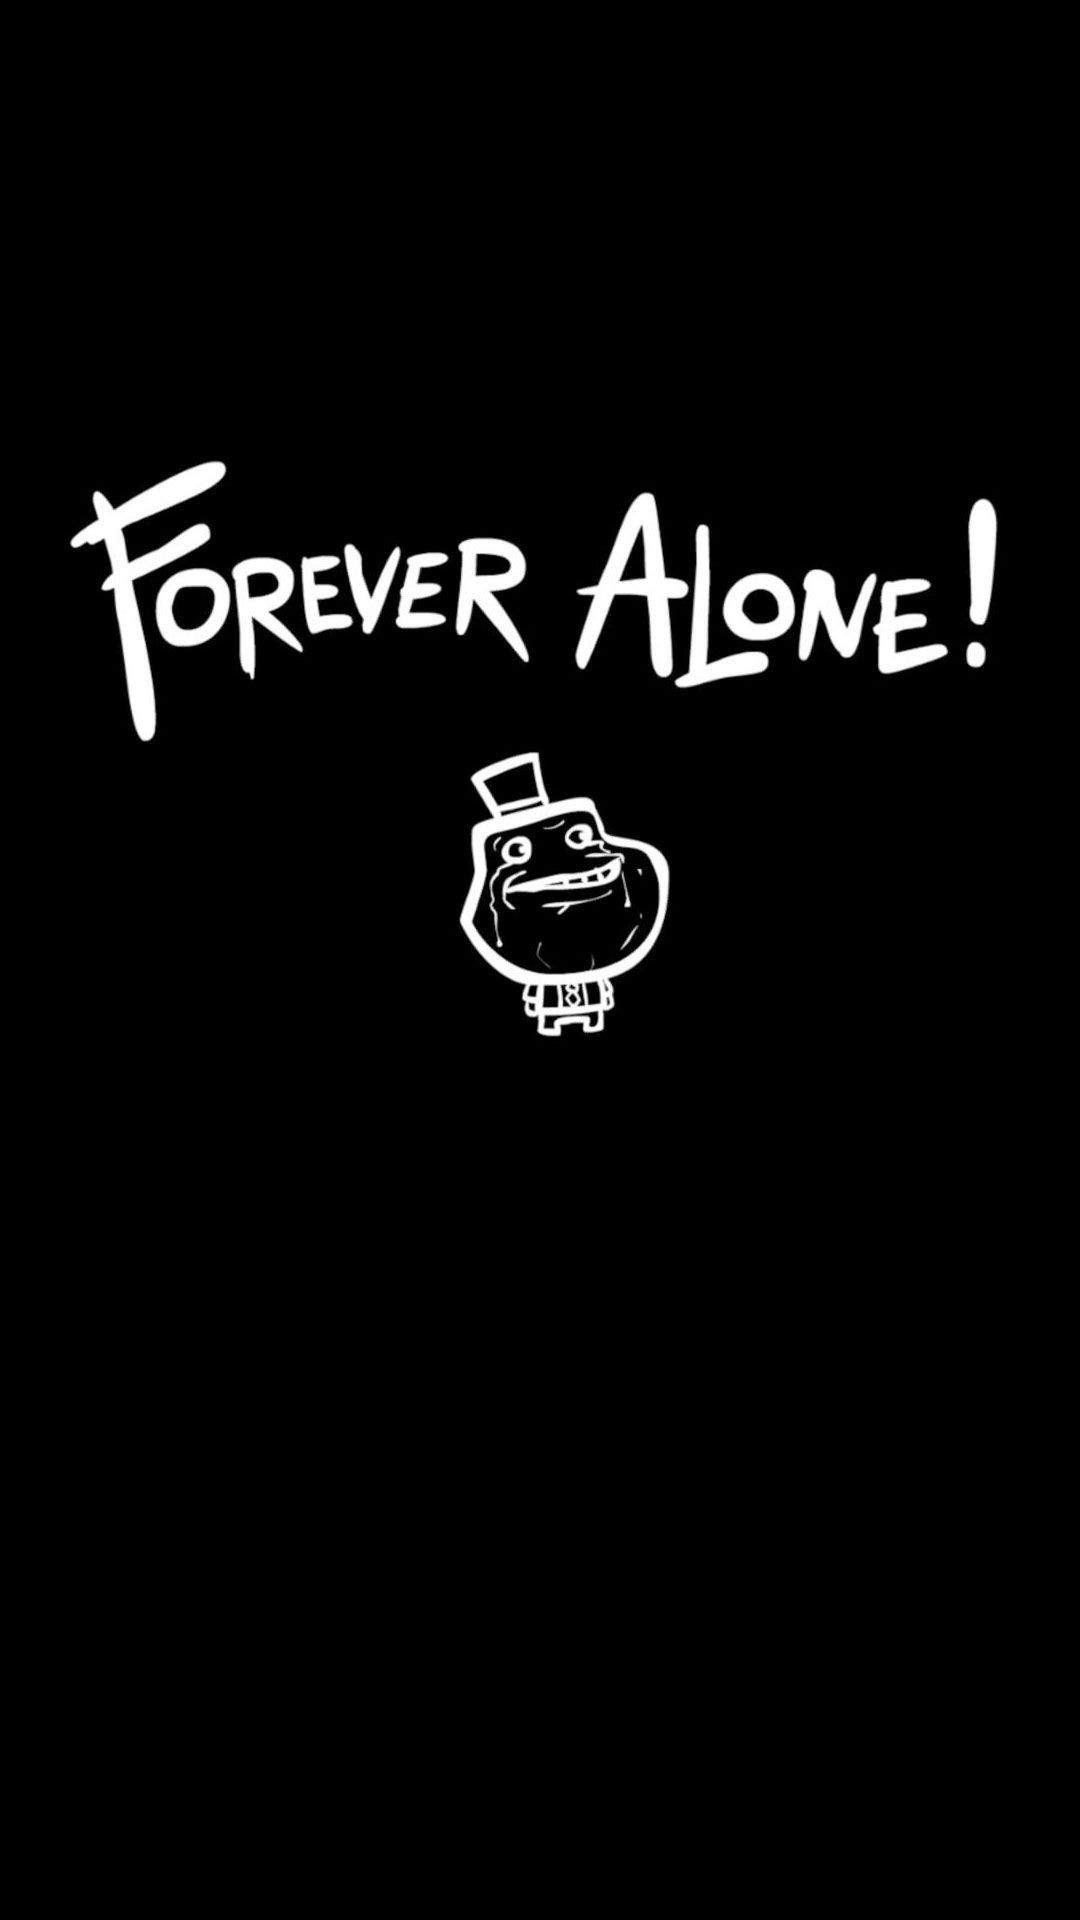 1080x1920 Wallpaper iphone black hd - Forever Alone Apple Iphone 6 Plus. Download